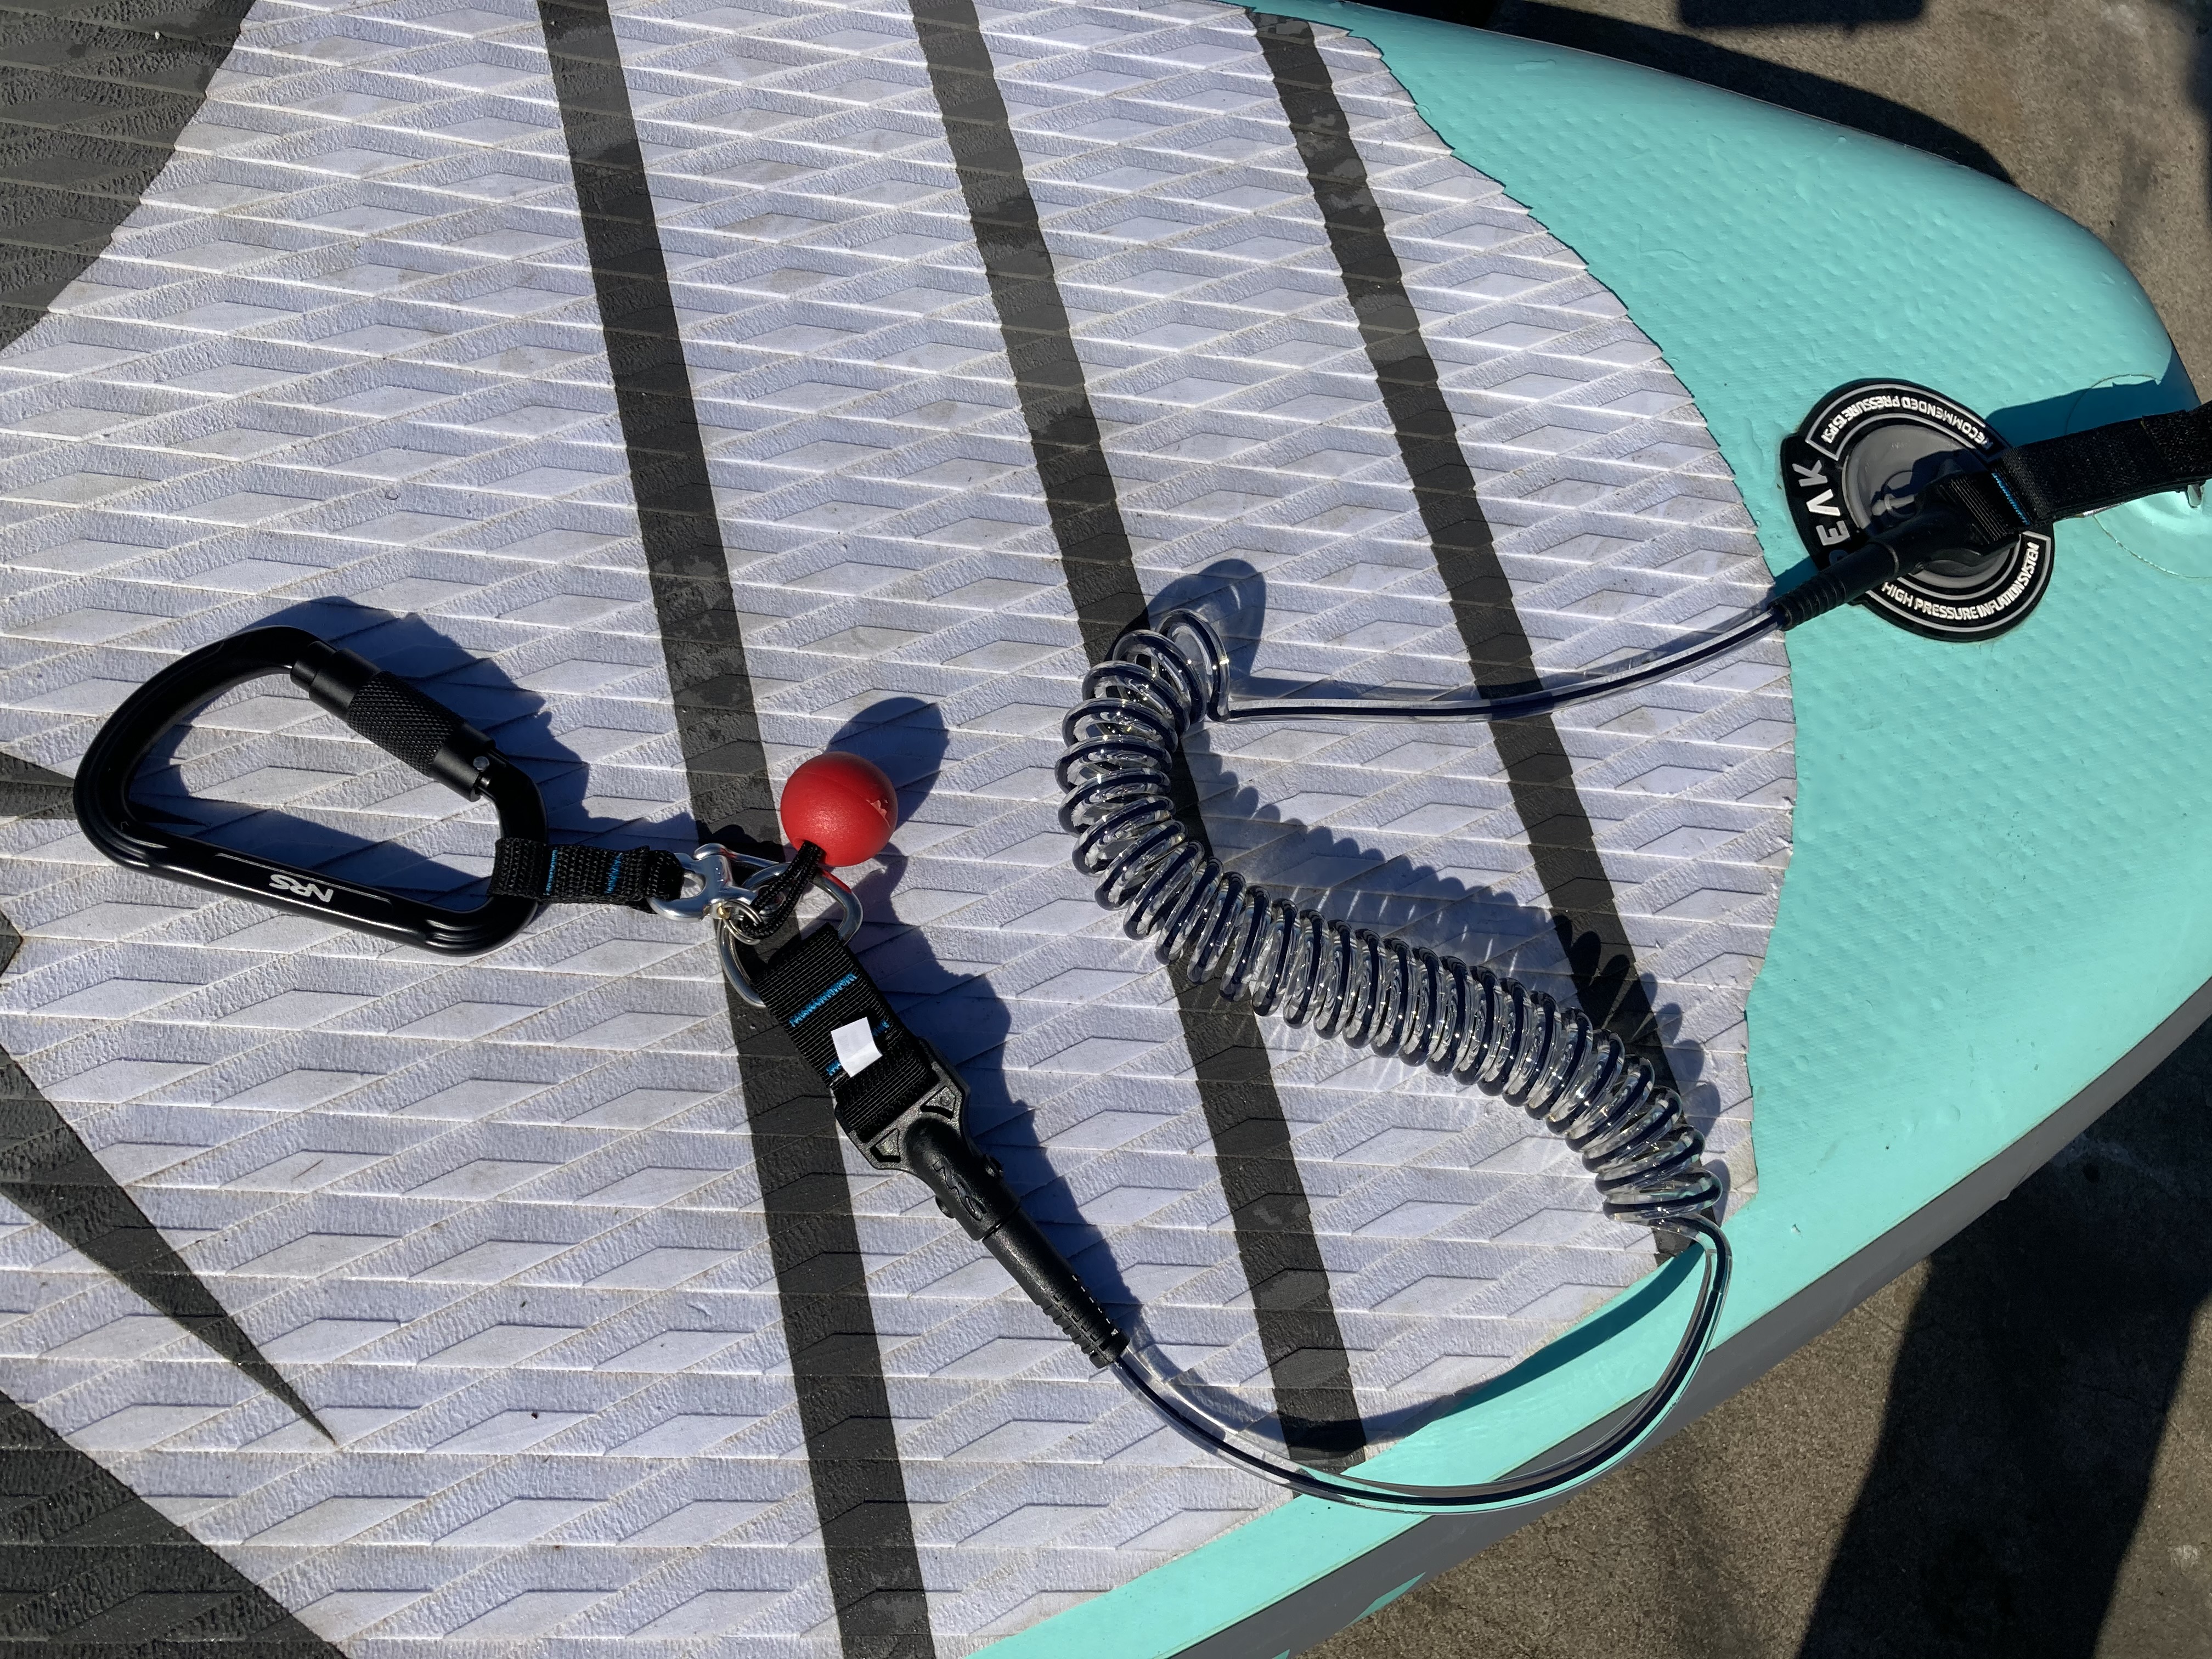 Quick release leash attached to a SUP